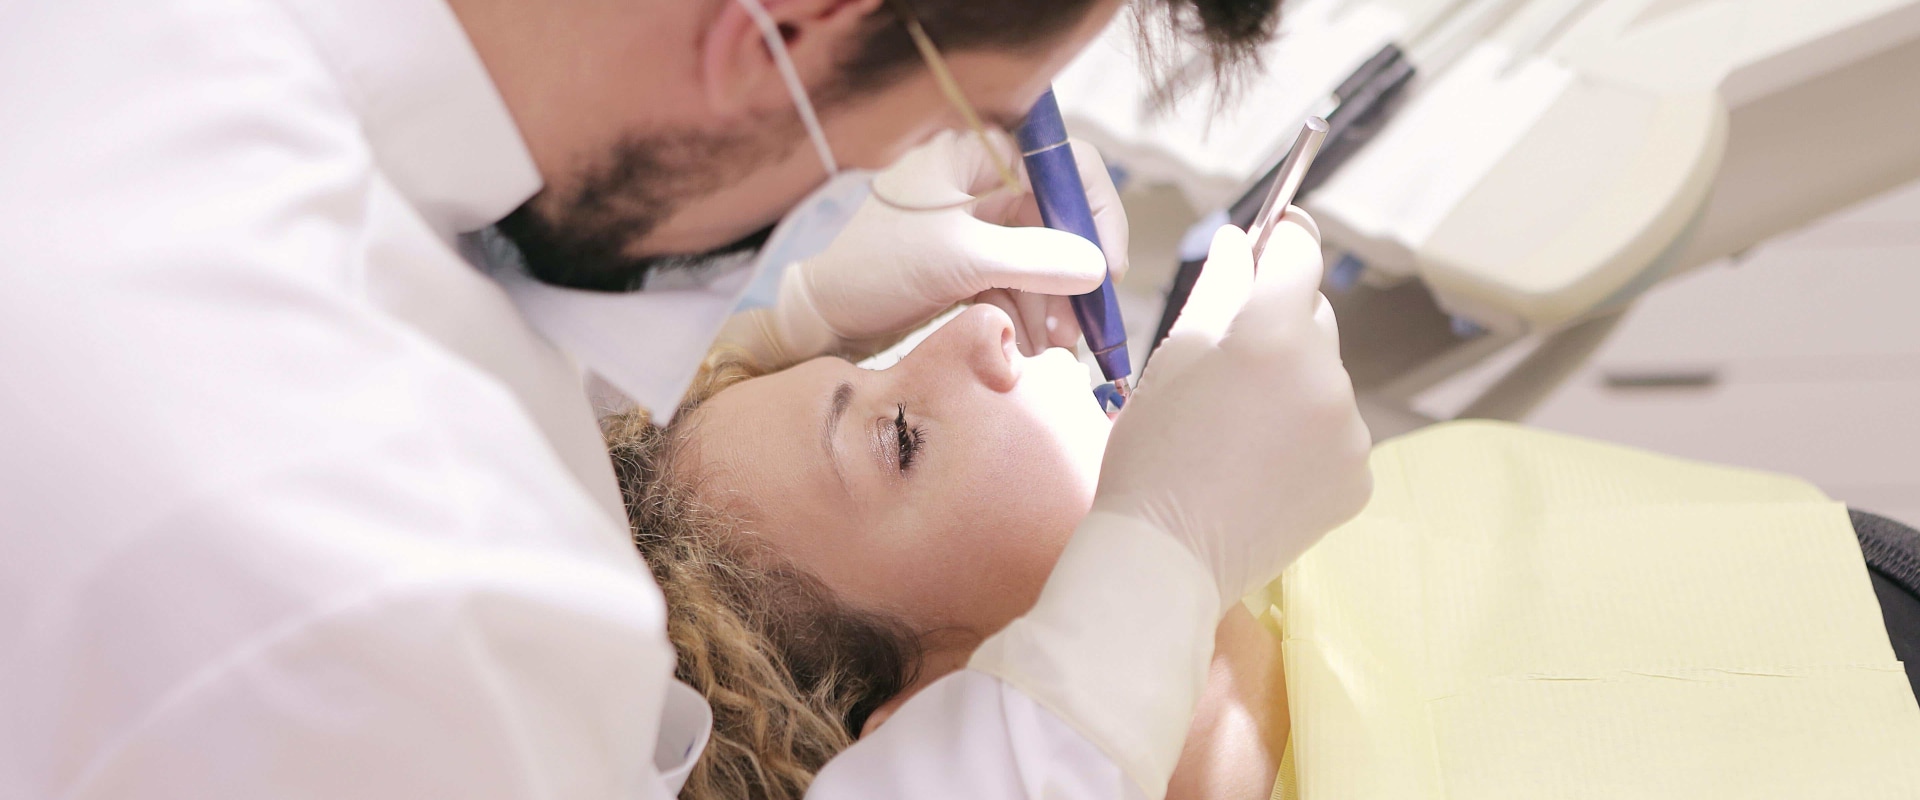 What are the main duties and responsibilities of a dentist?